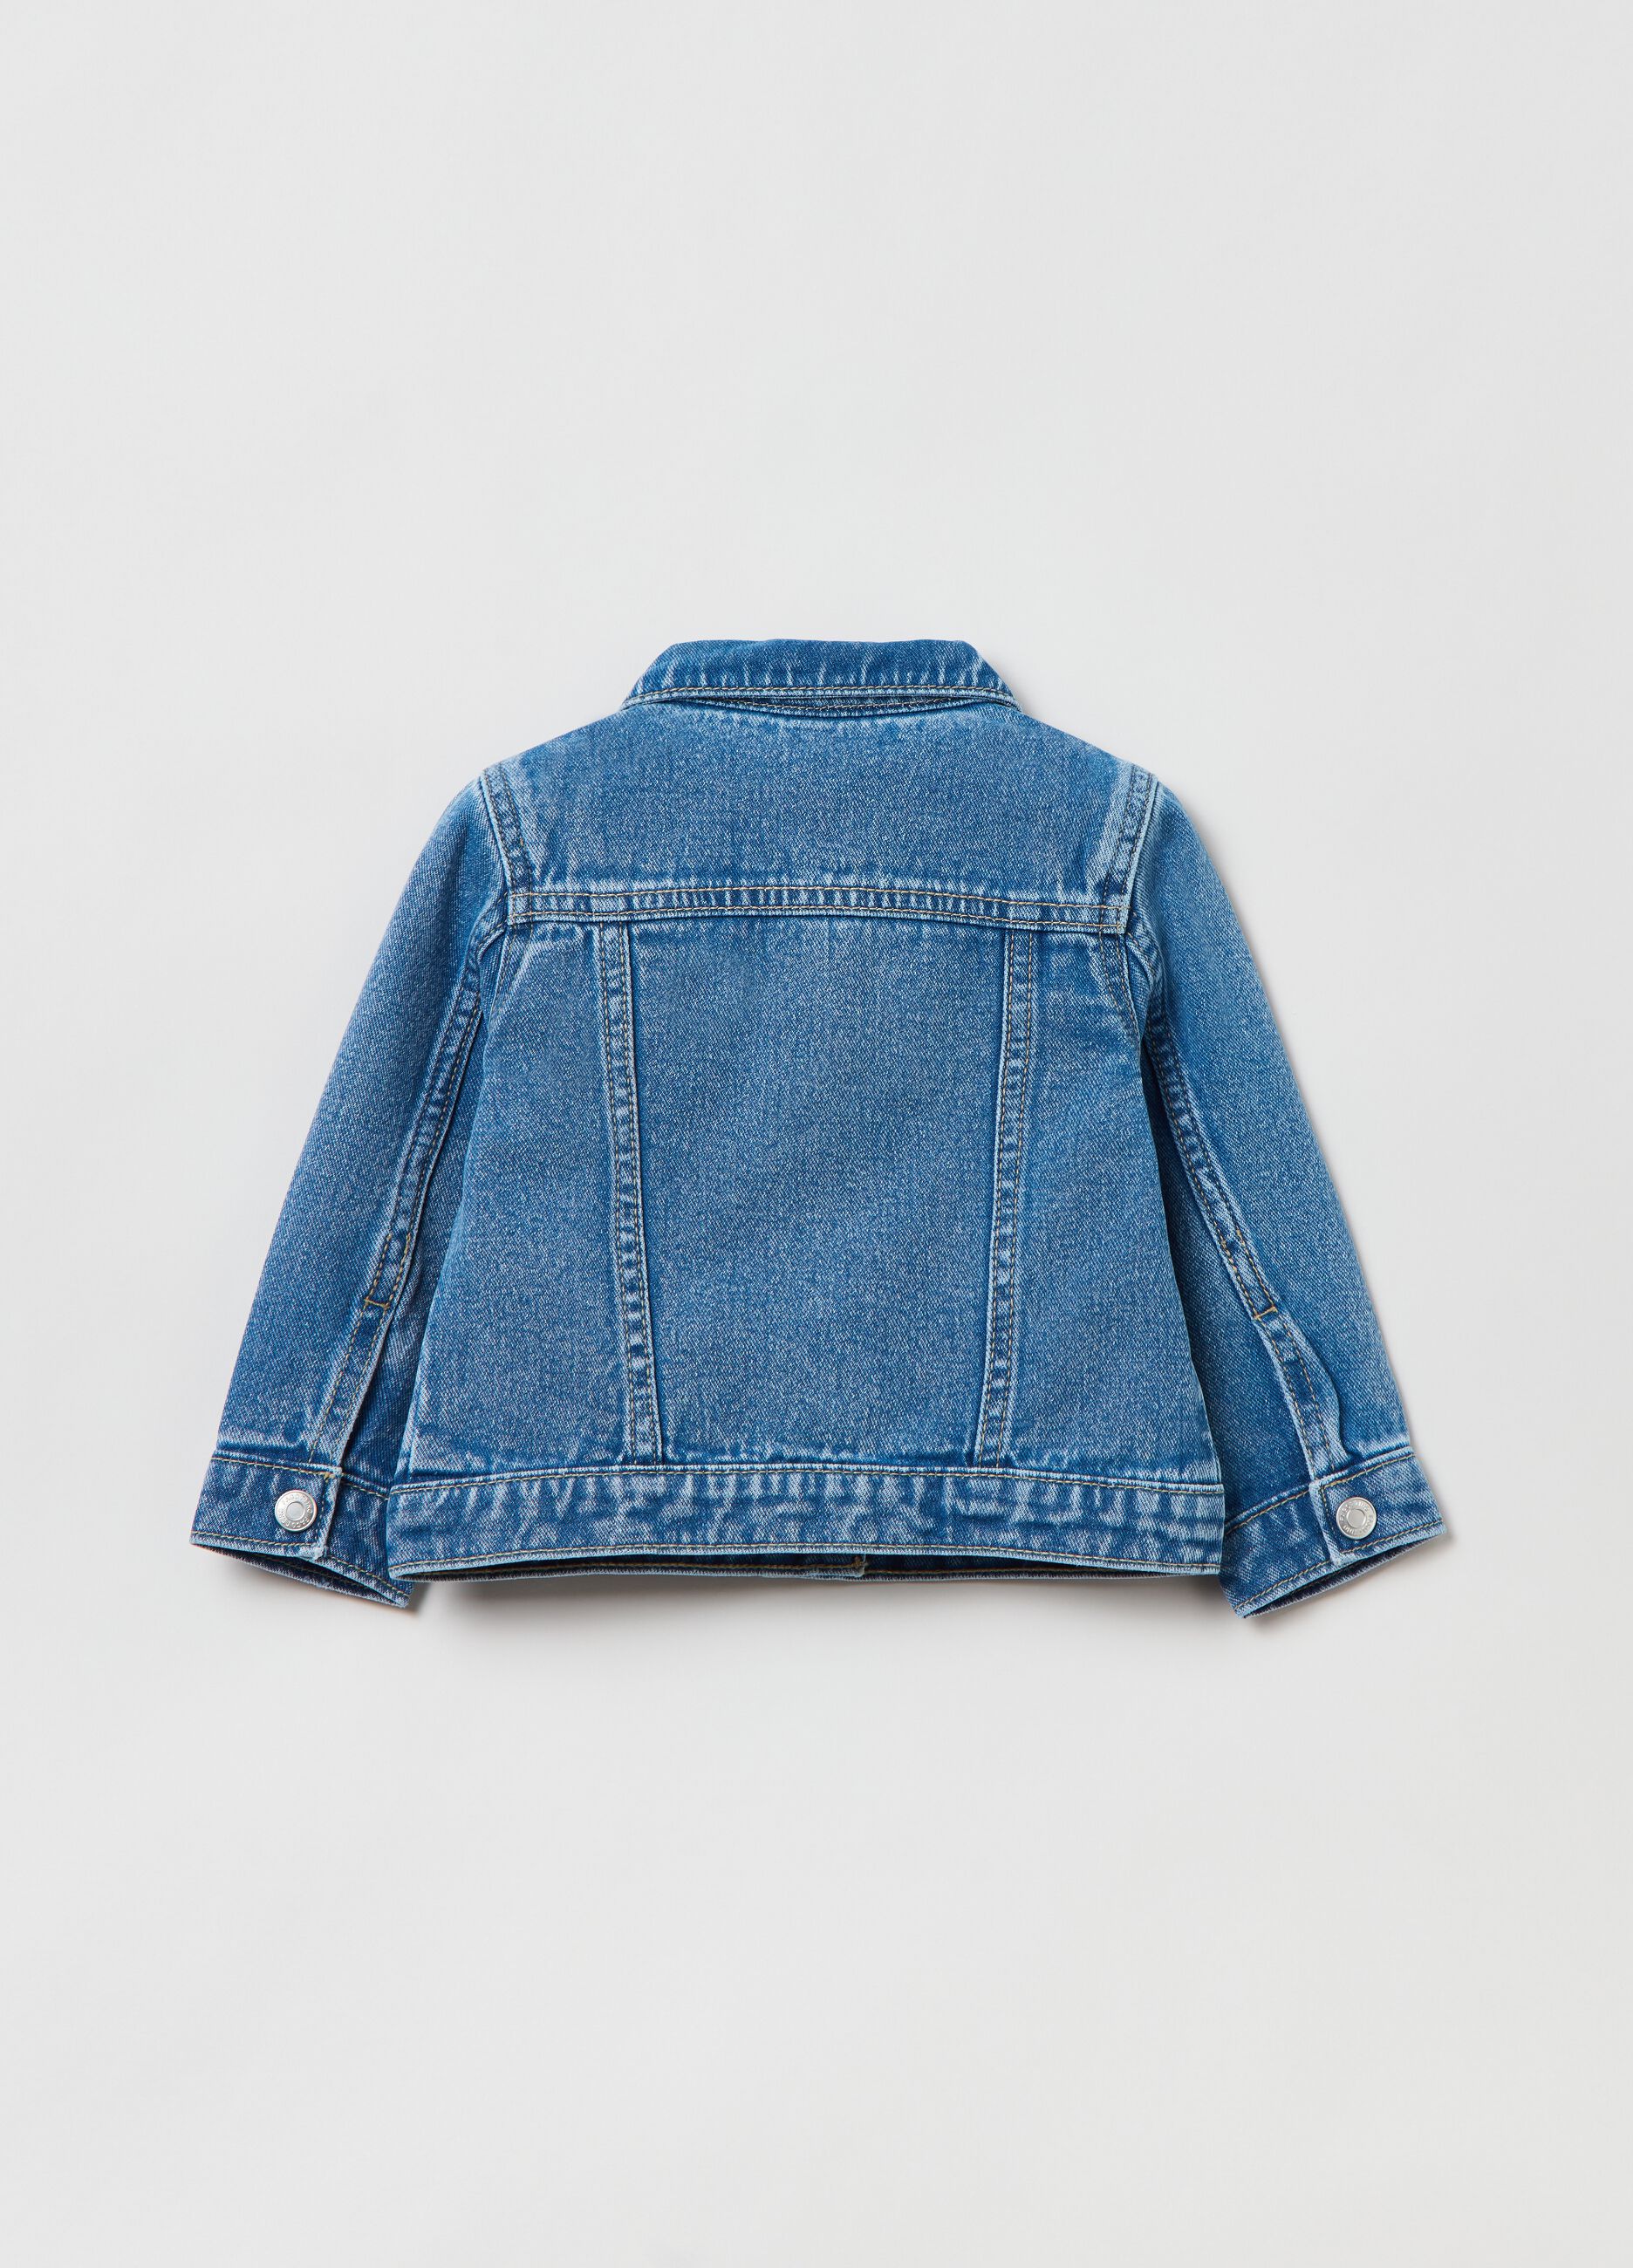 Denim jacket with flower embroidery